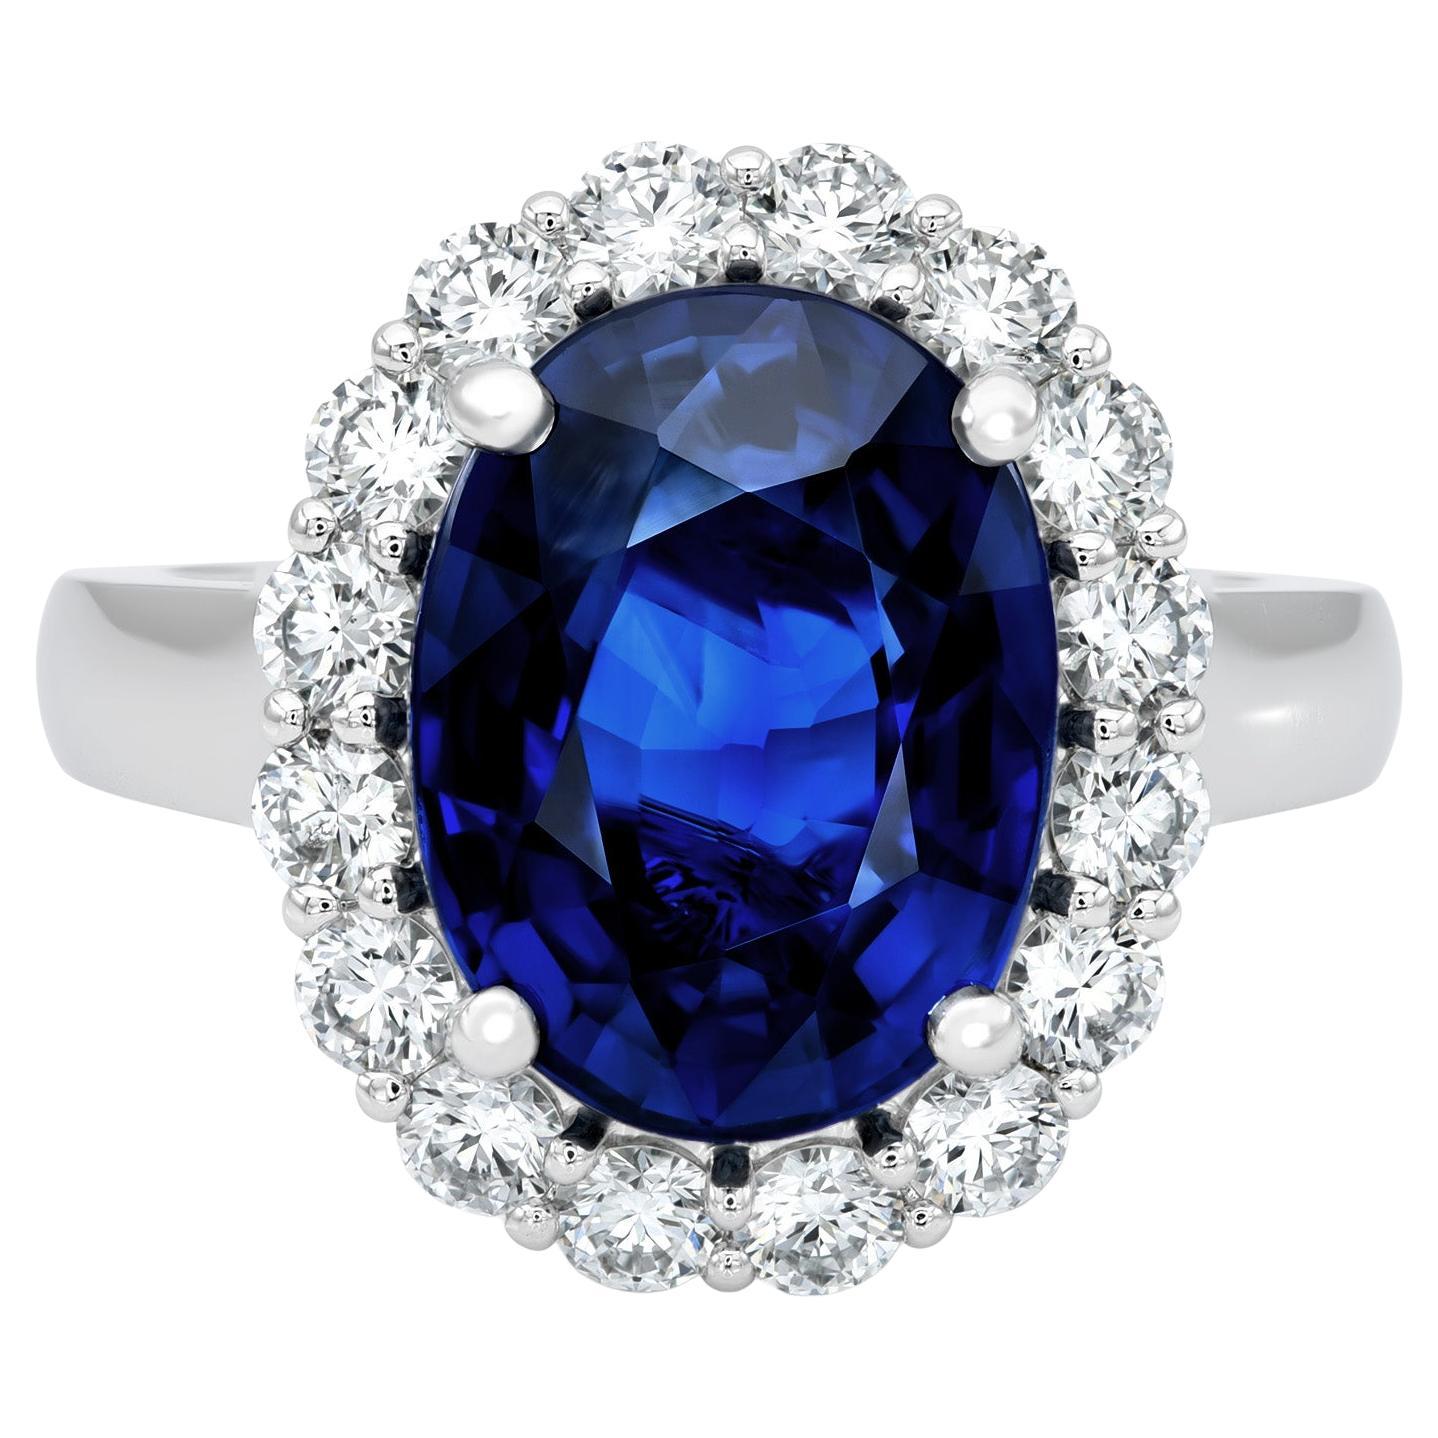 GIA Certified 7.03 carats Natural Blue Sapphire set in Platinum Diamond Ring  For Sale